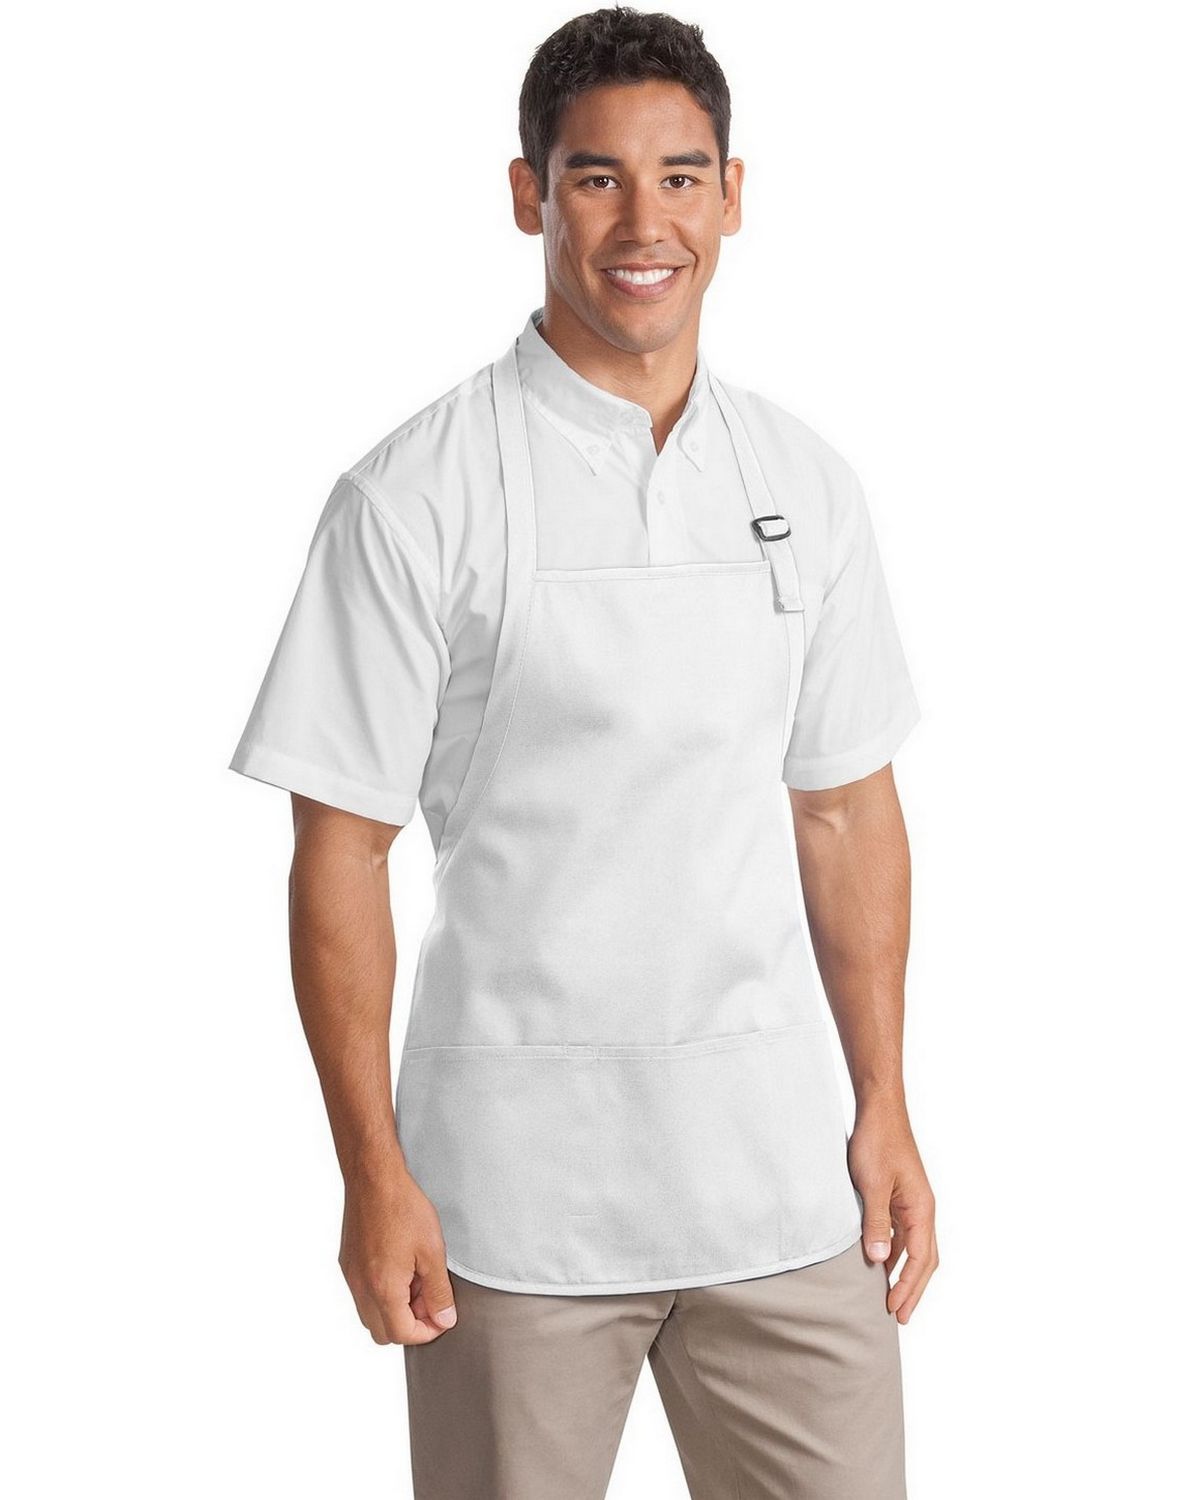 A510 Port Authority Medium-Length Apron with Pouch Pockets 